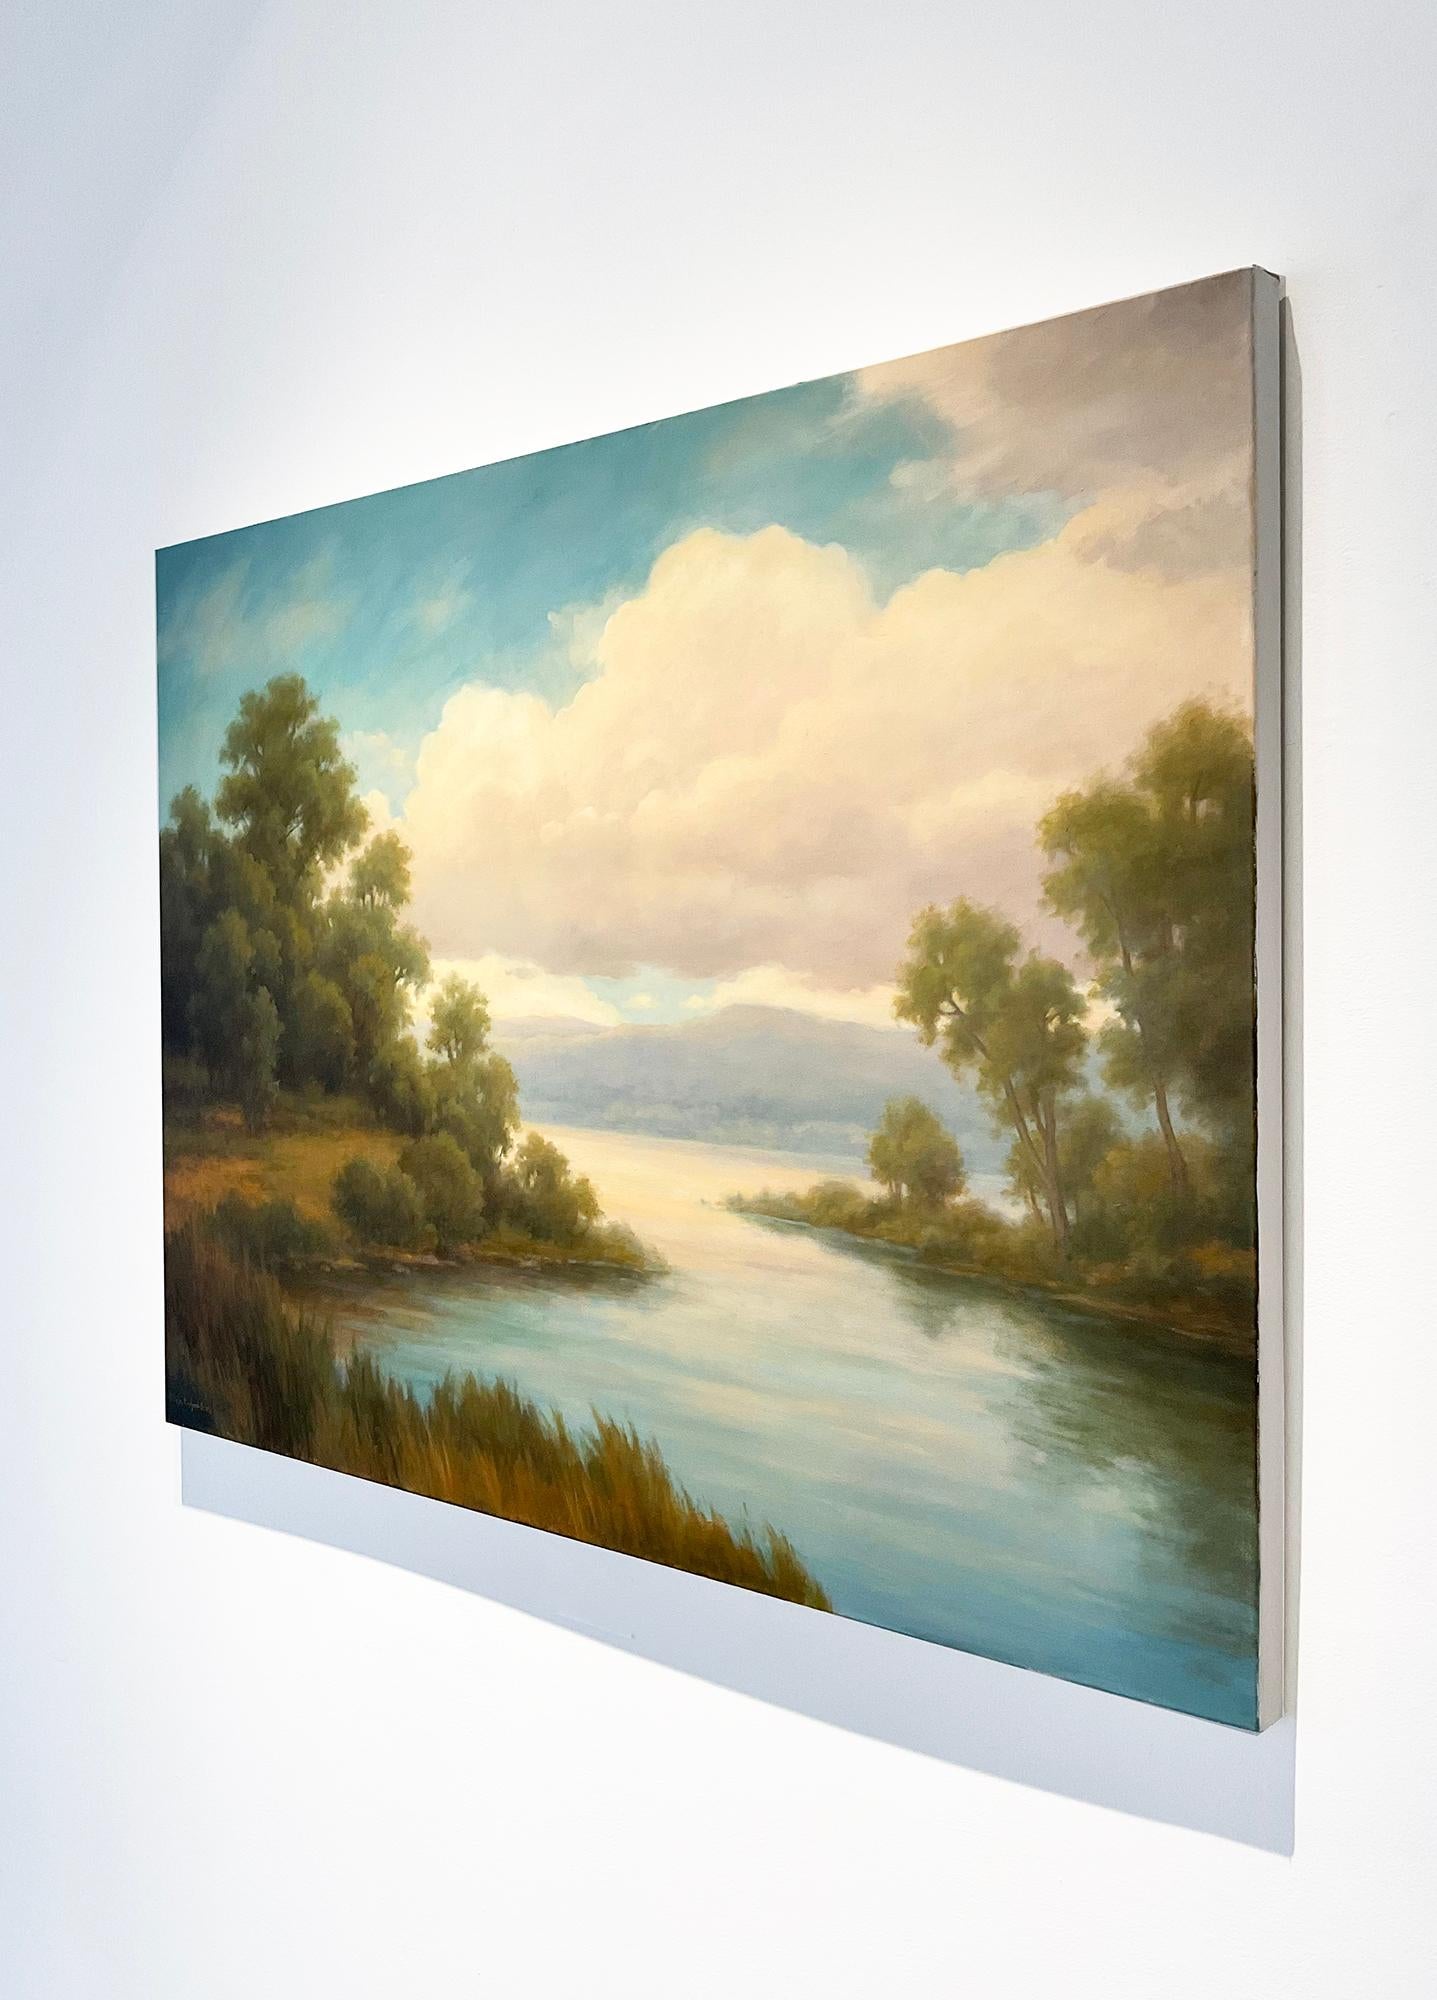 Modern Luminist, Hudson River School landscape painting on canvas of a creek and river meeting around a forest bend with mountains in the distance
